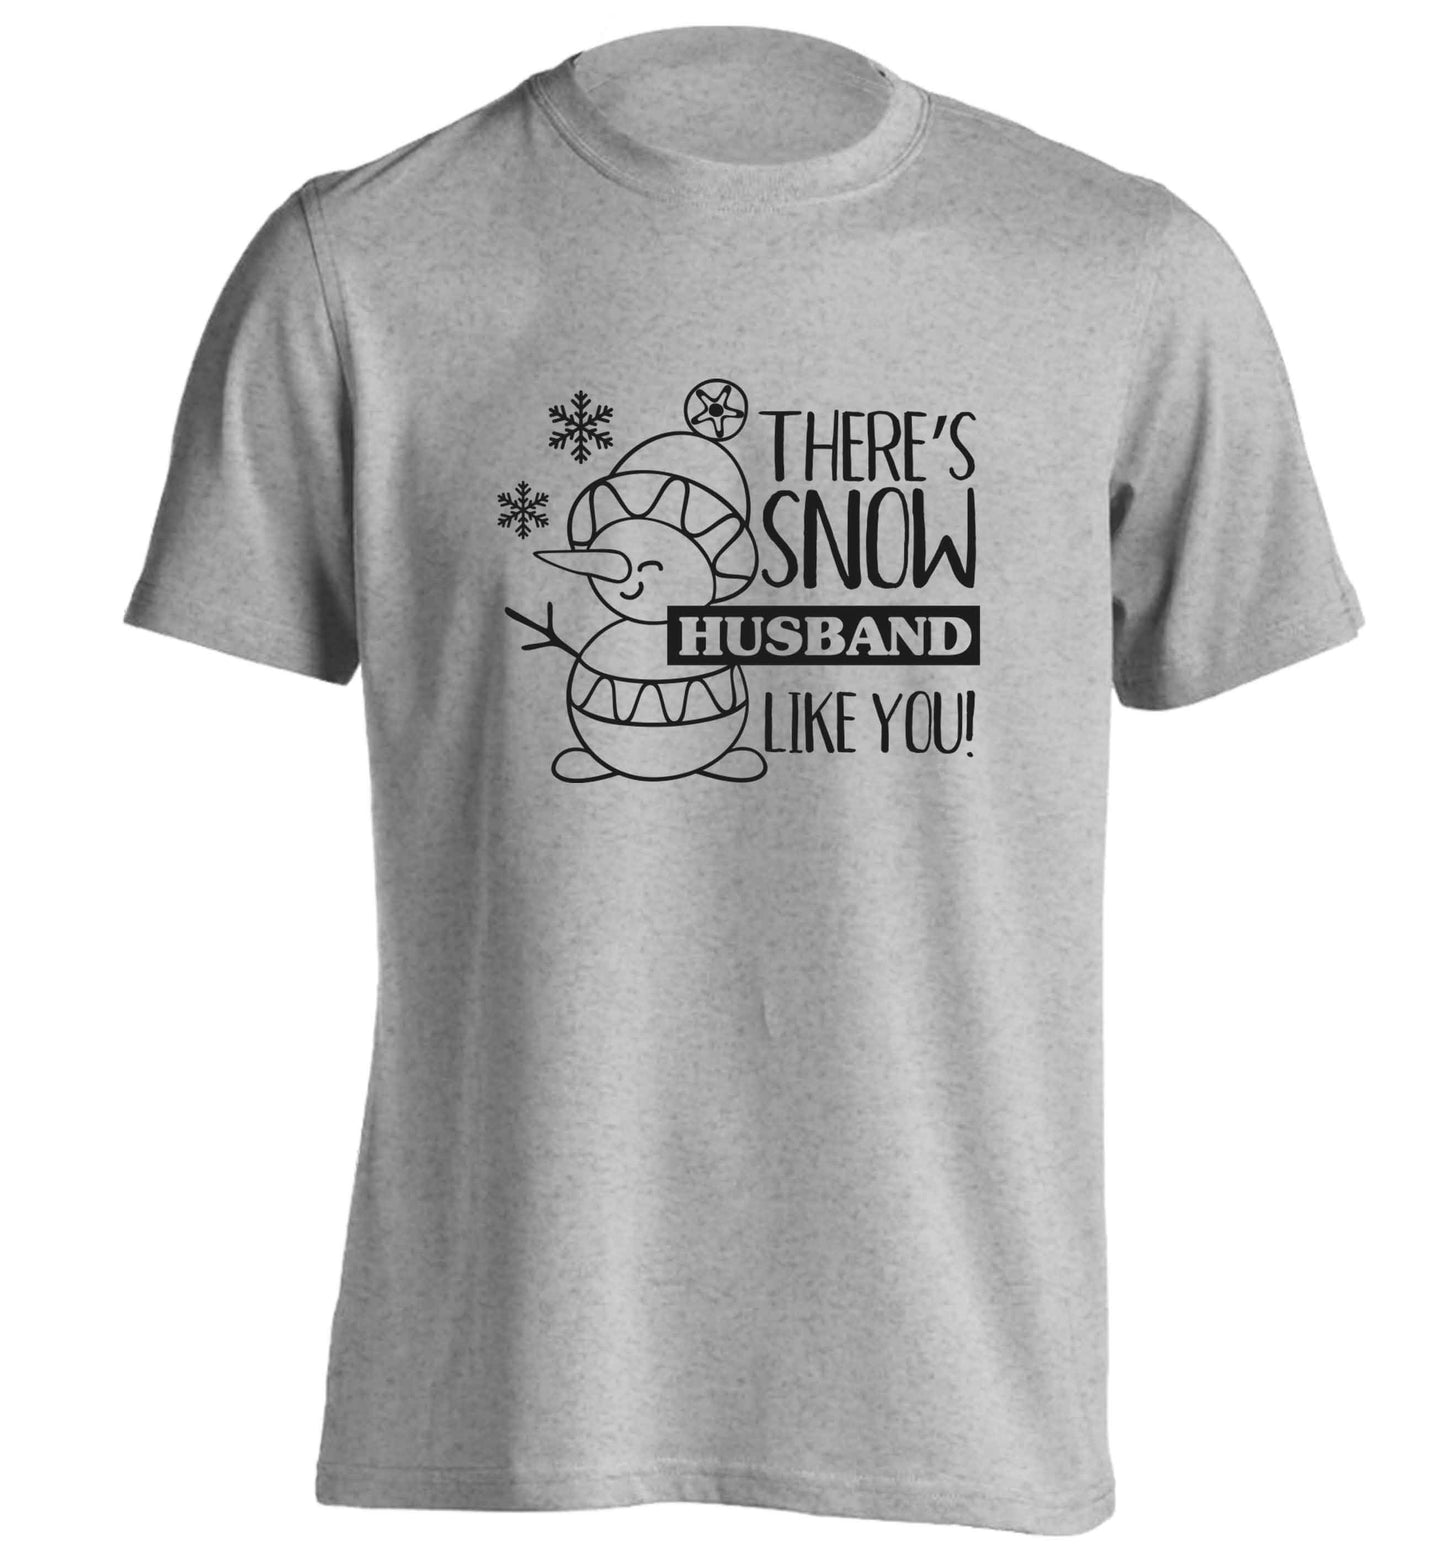 There's snow husband like you adults unisex grey Tshirt 2XL